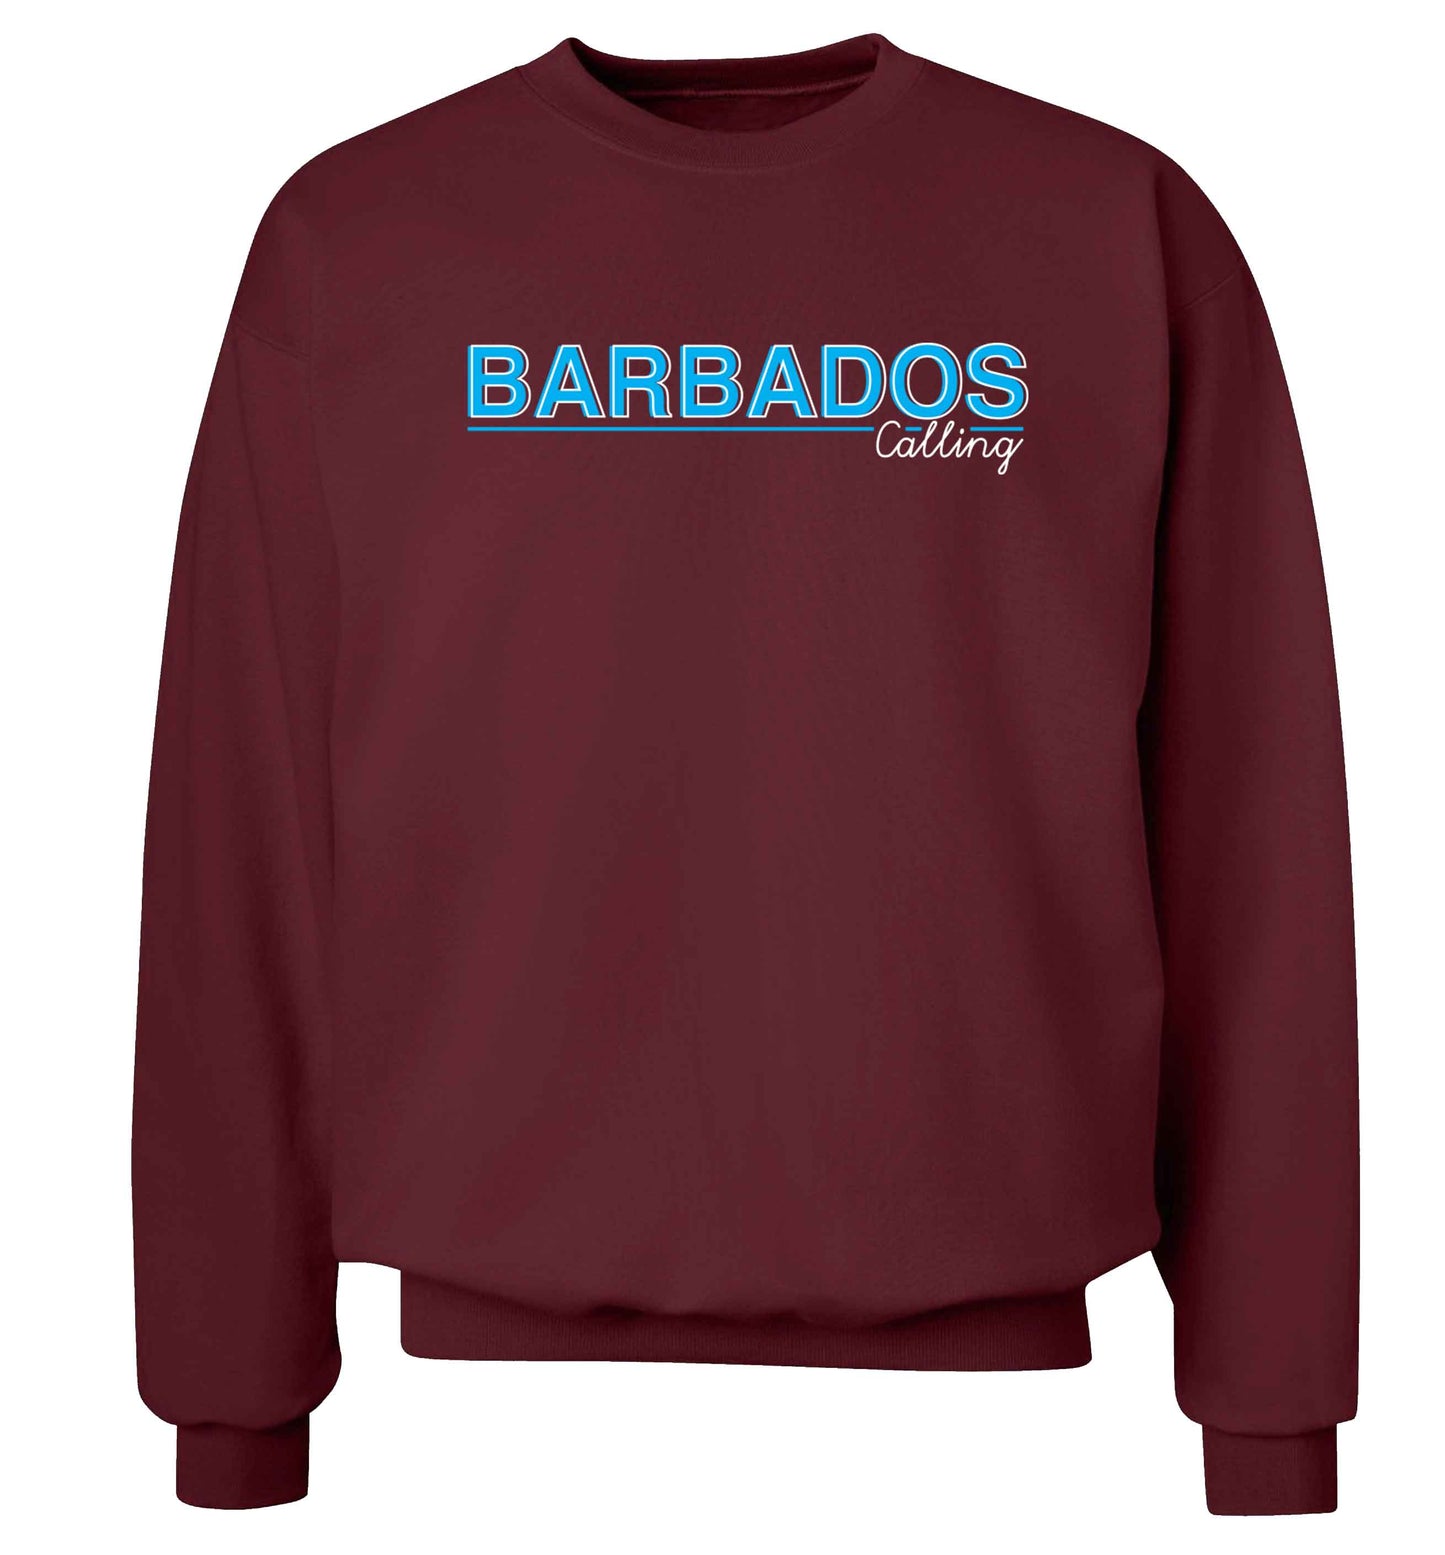 Barbados calling Adult's unisex maroon Sweater 2XL